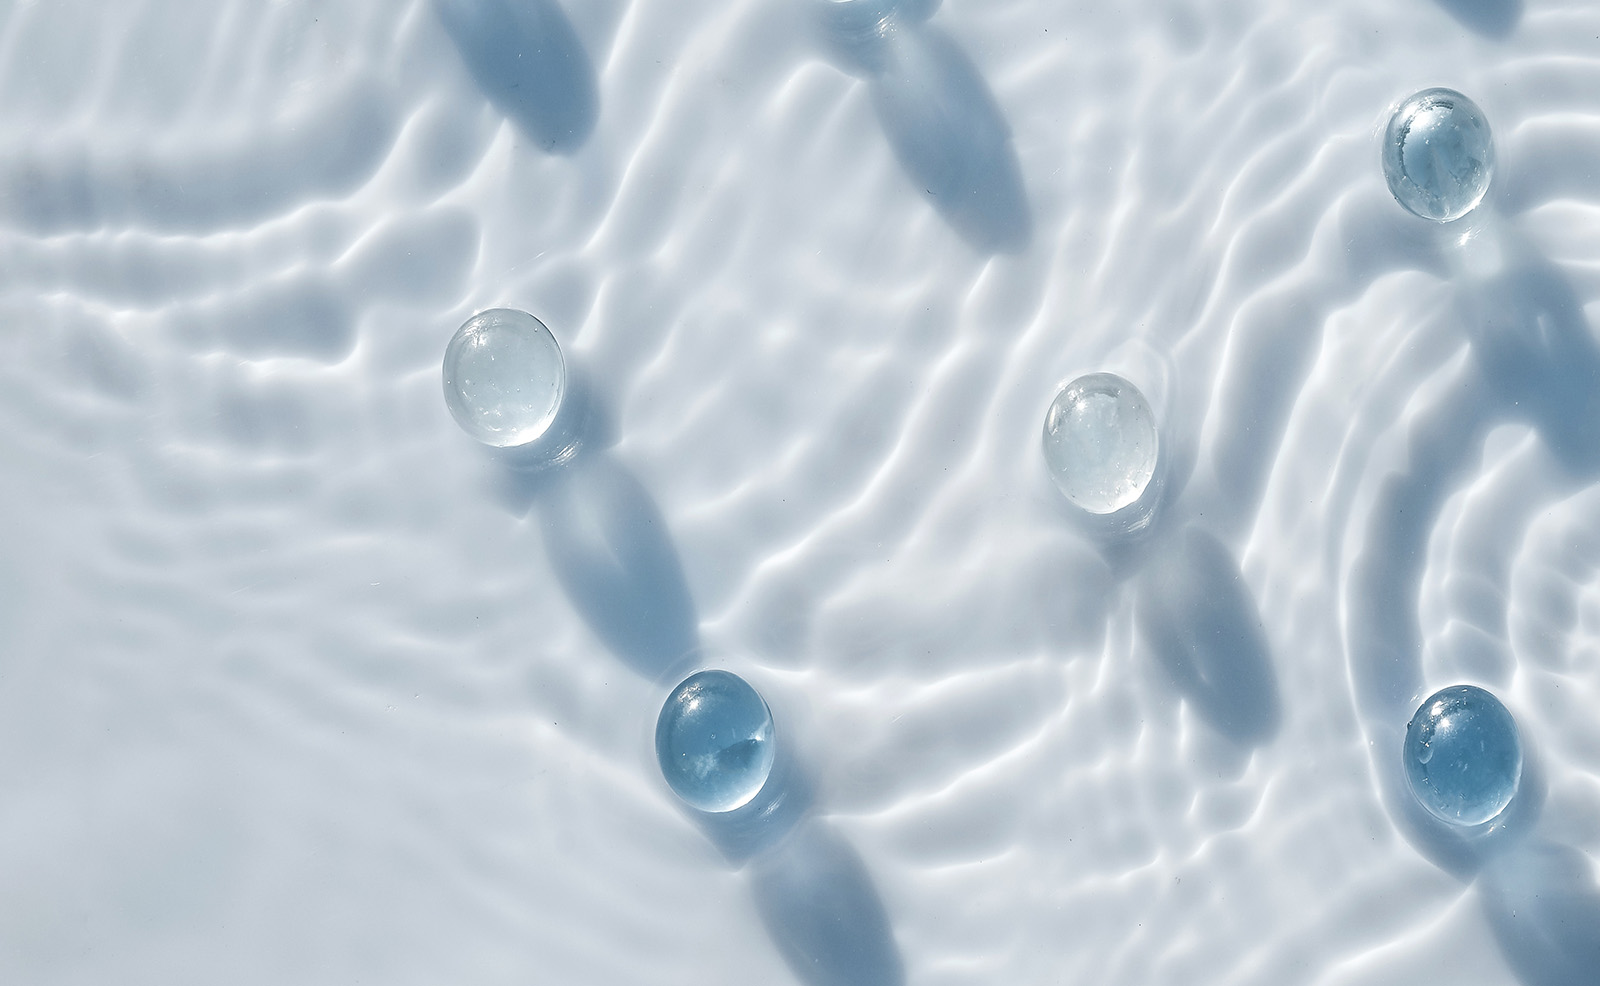 The image features a close-up of clear water droplets on a textured surface, with a blurred background that suggests a shallow depth of field.